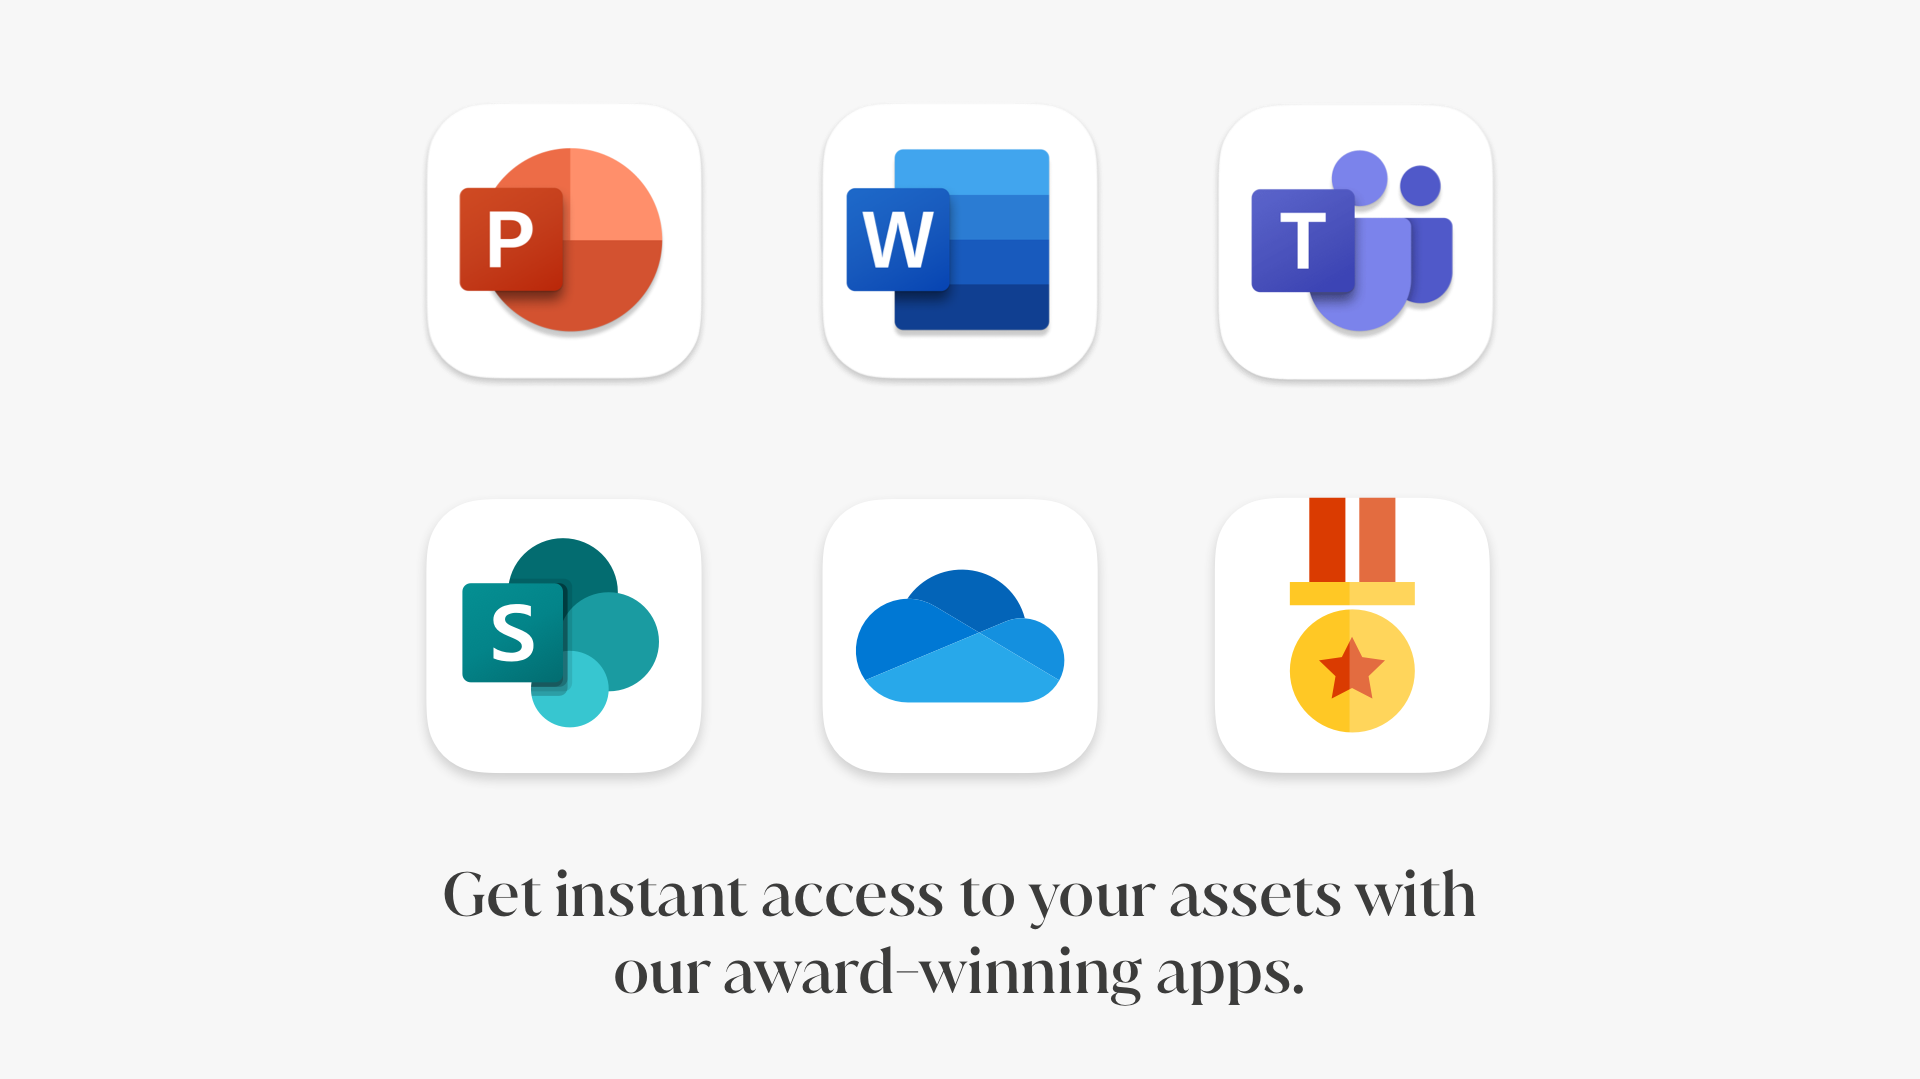 03_Get instant access to your assets with our award-winning apps_0